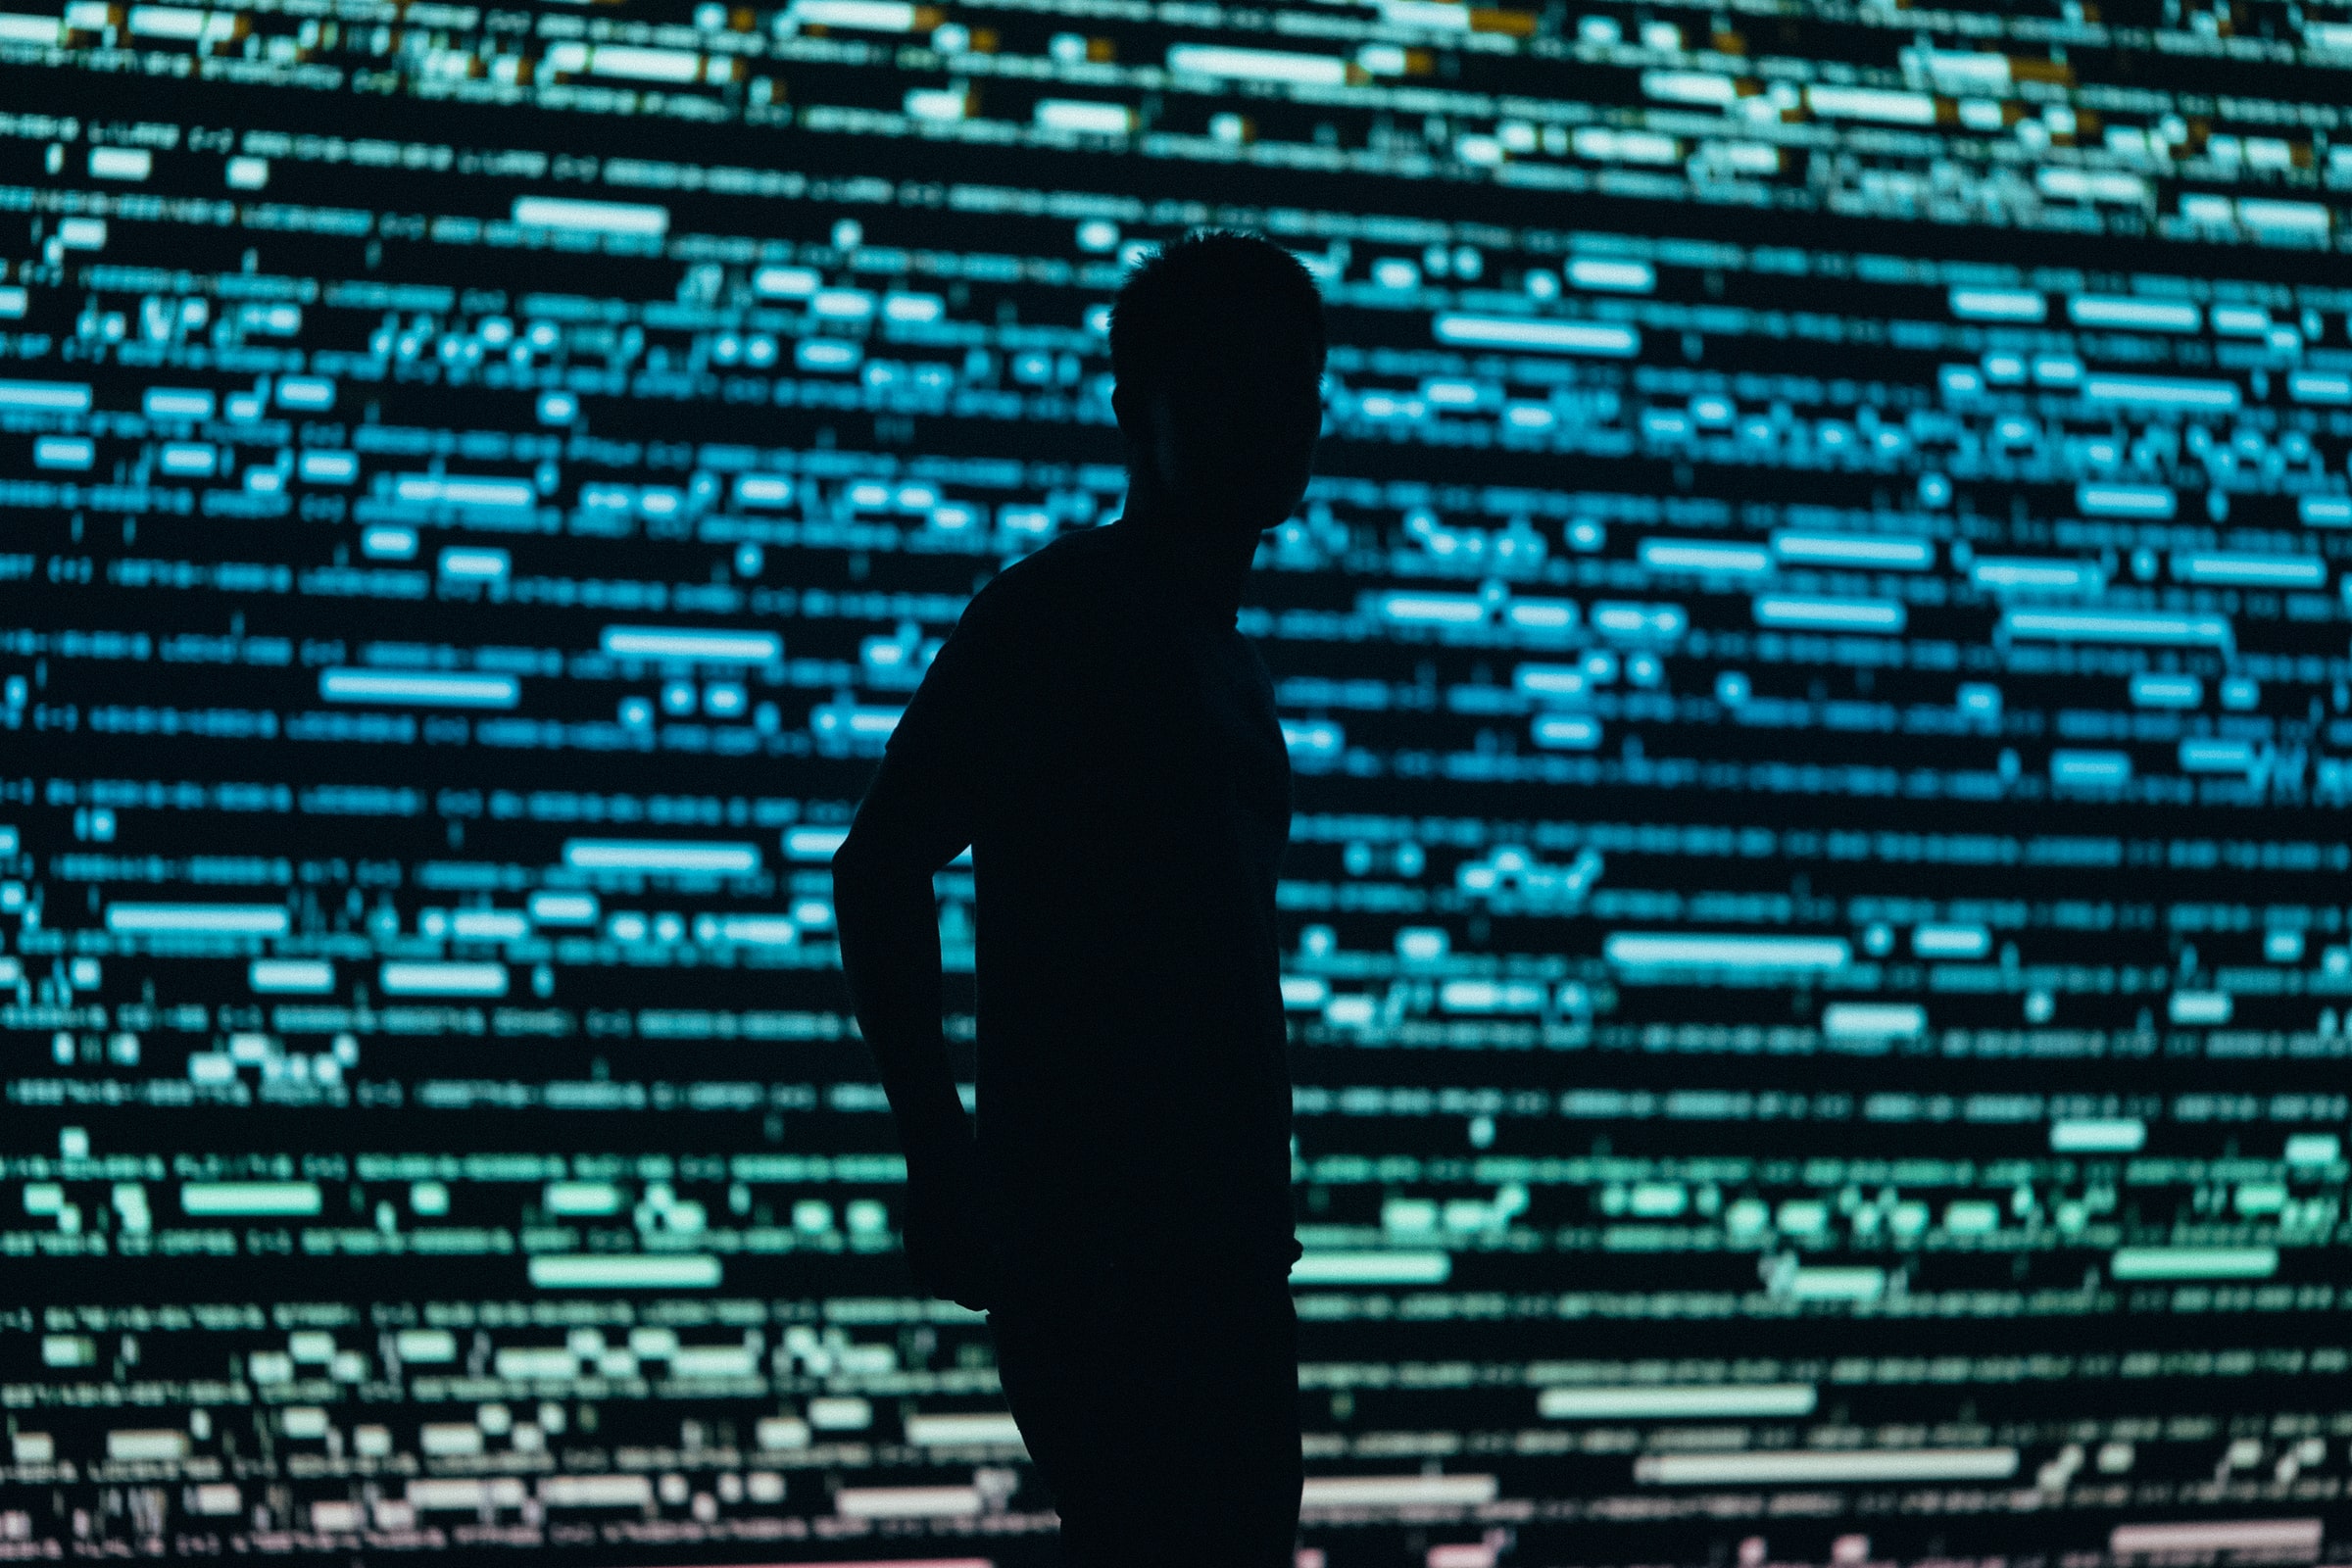 Photo of a silhouette of a man against a large screen showing computer data